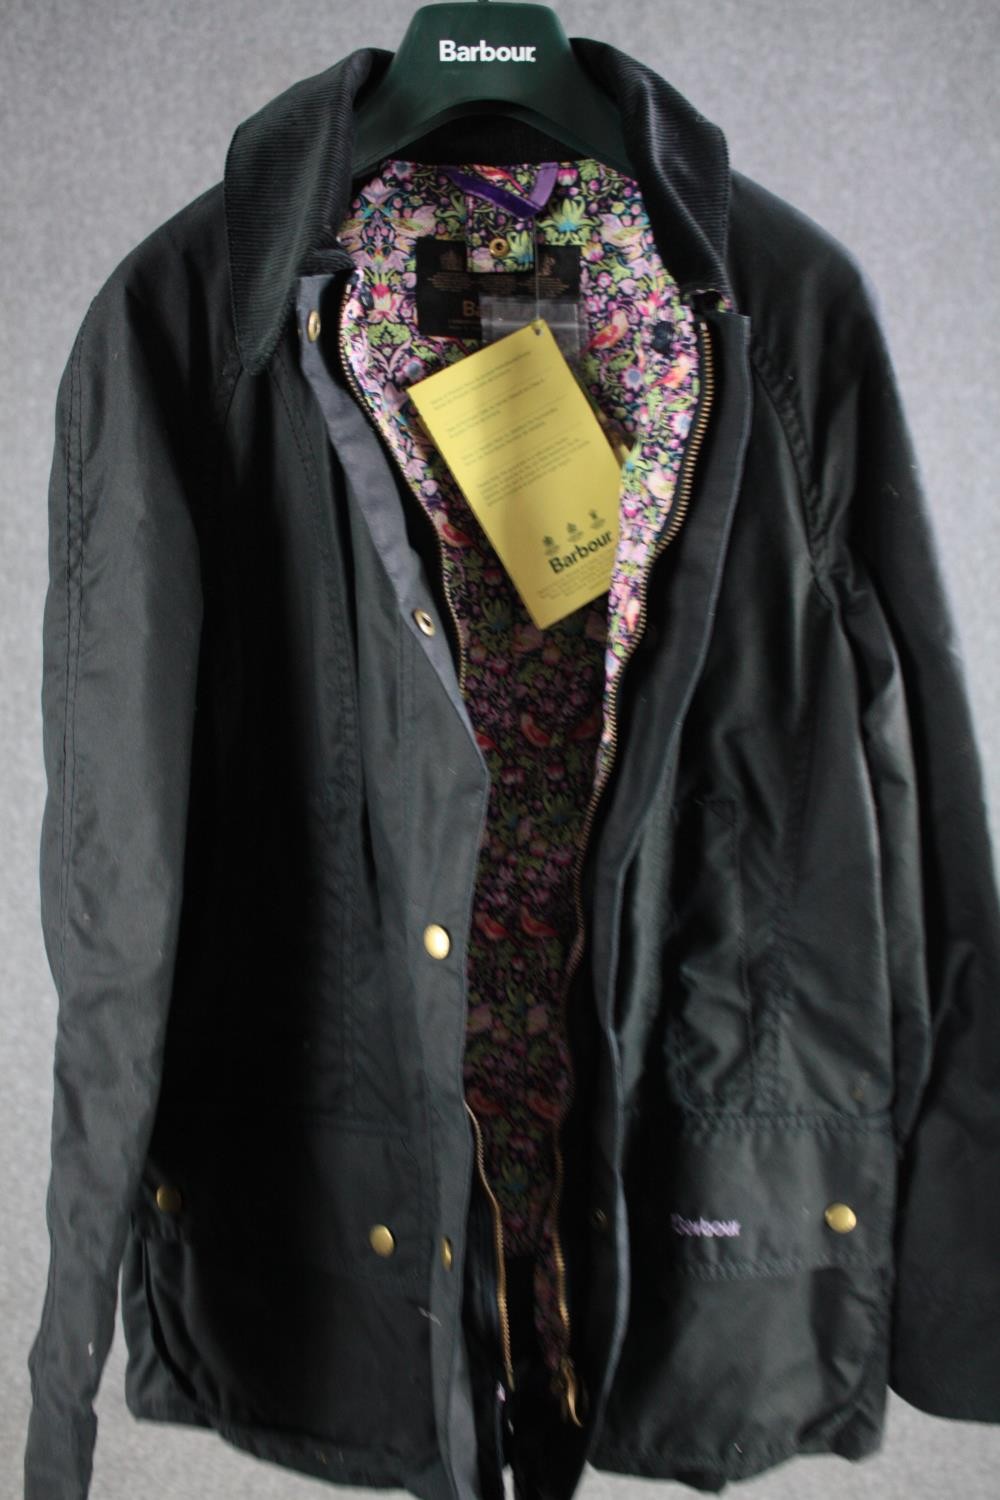 Women's Barbour jacket. UK size 10 with a paisley lining. - Image 4 of 6